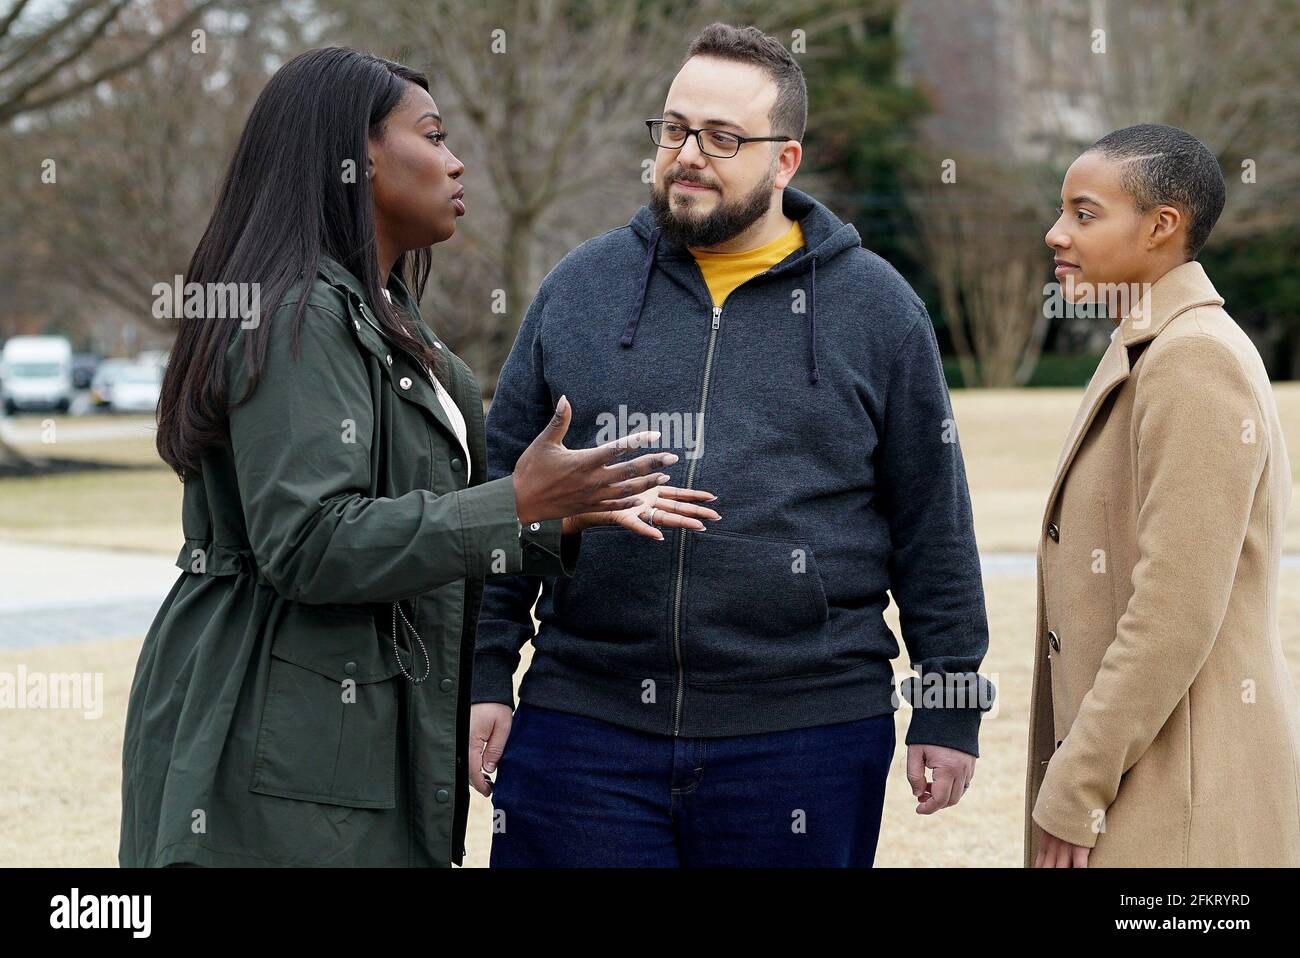 SHE'S THE BOSS, from left: Nicole Walters, Josh Walters, Krissy 'Butler with Benefits', (Season 1, ep. 101, aired Feb. 25, 2021). photo: Brown / ©USA Network / Courtesy: Collection Stock - Alamy